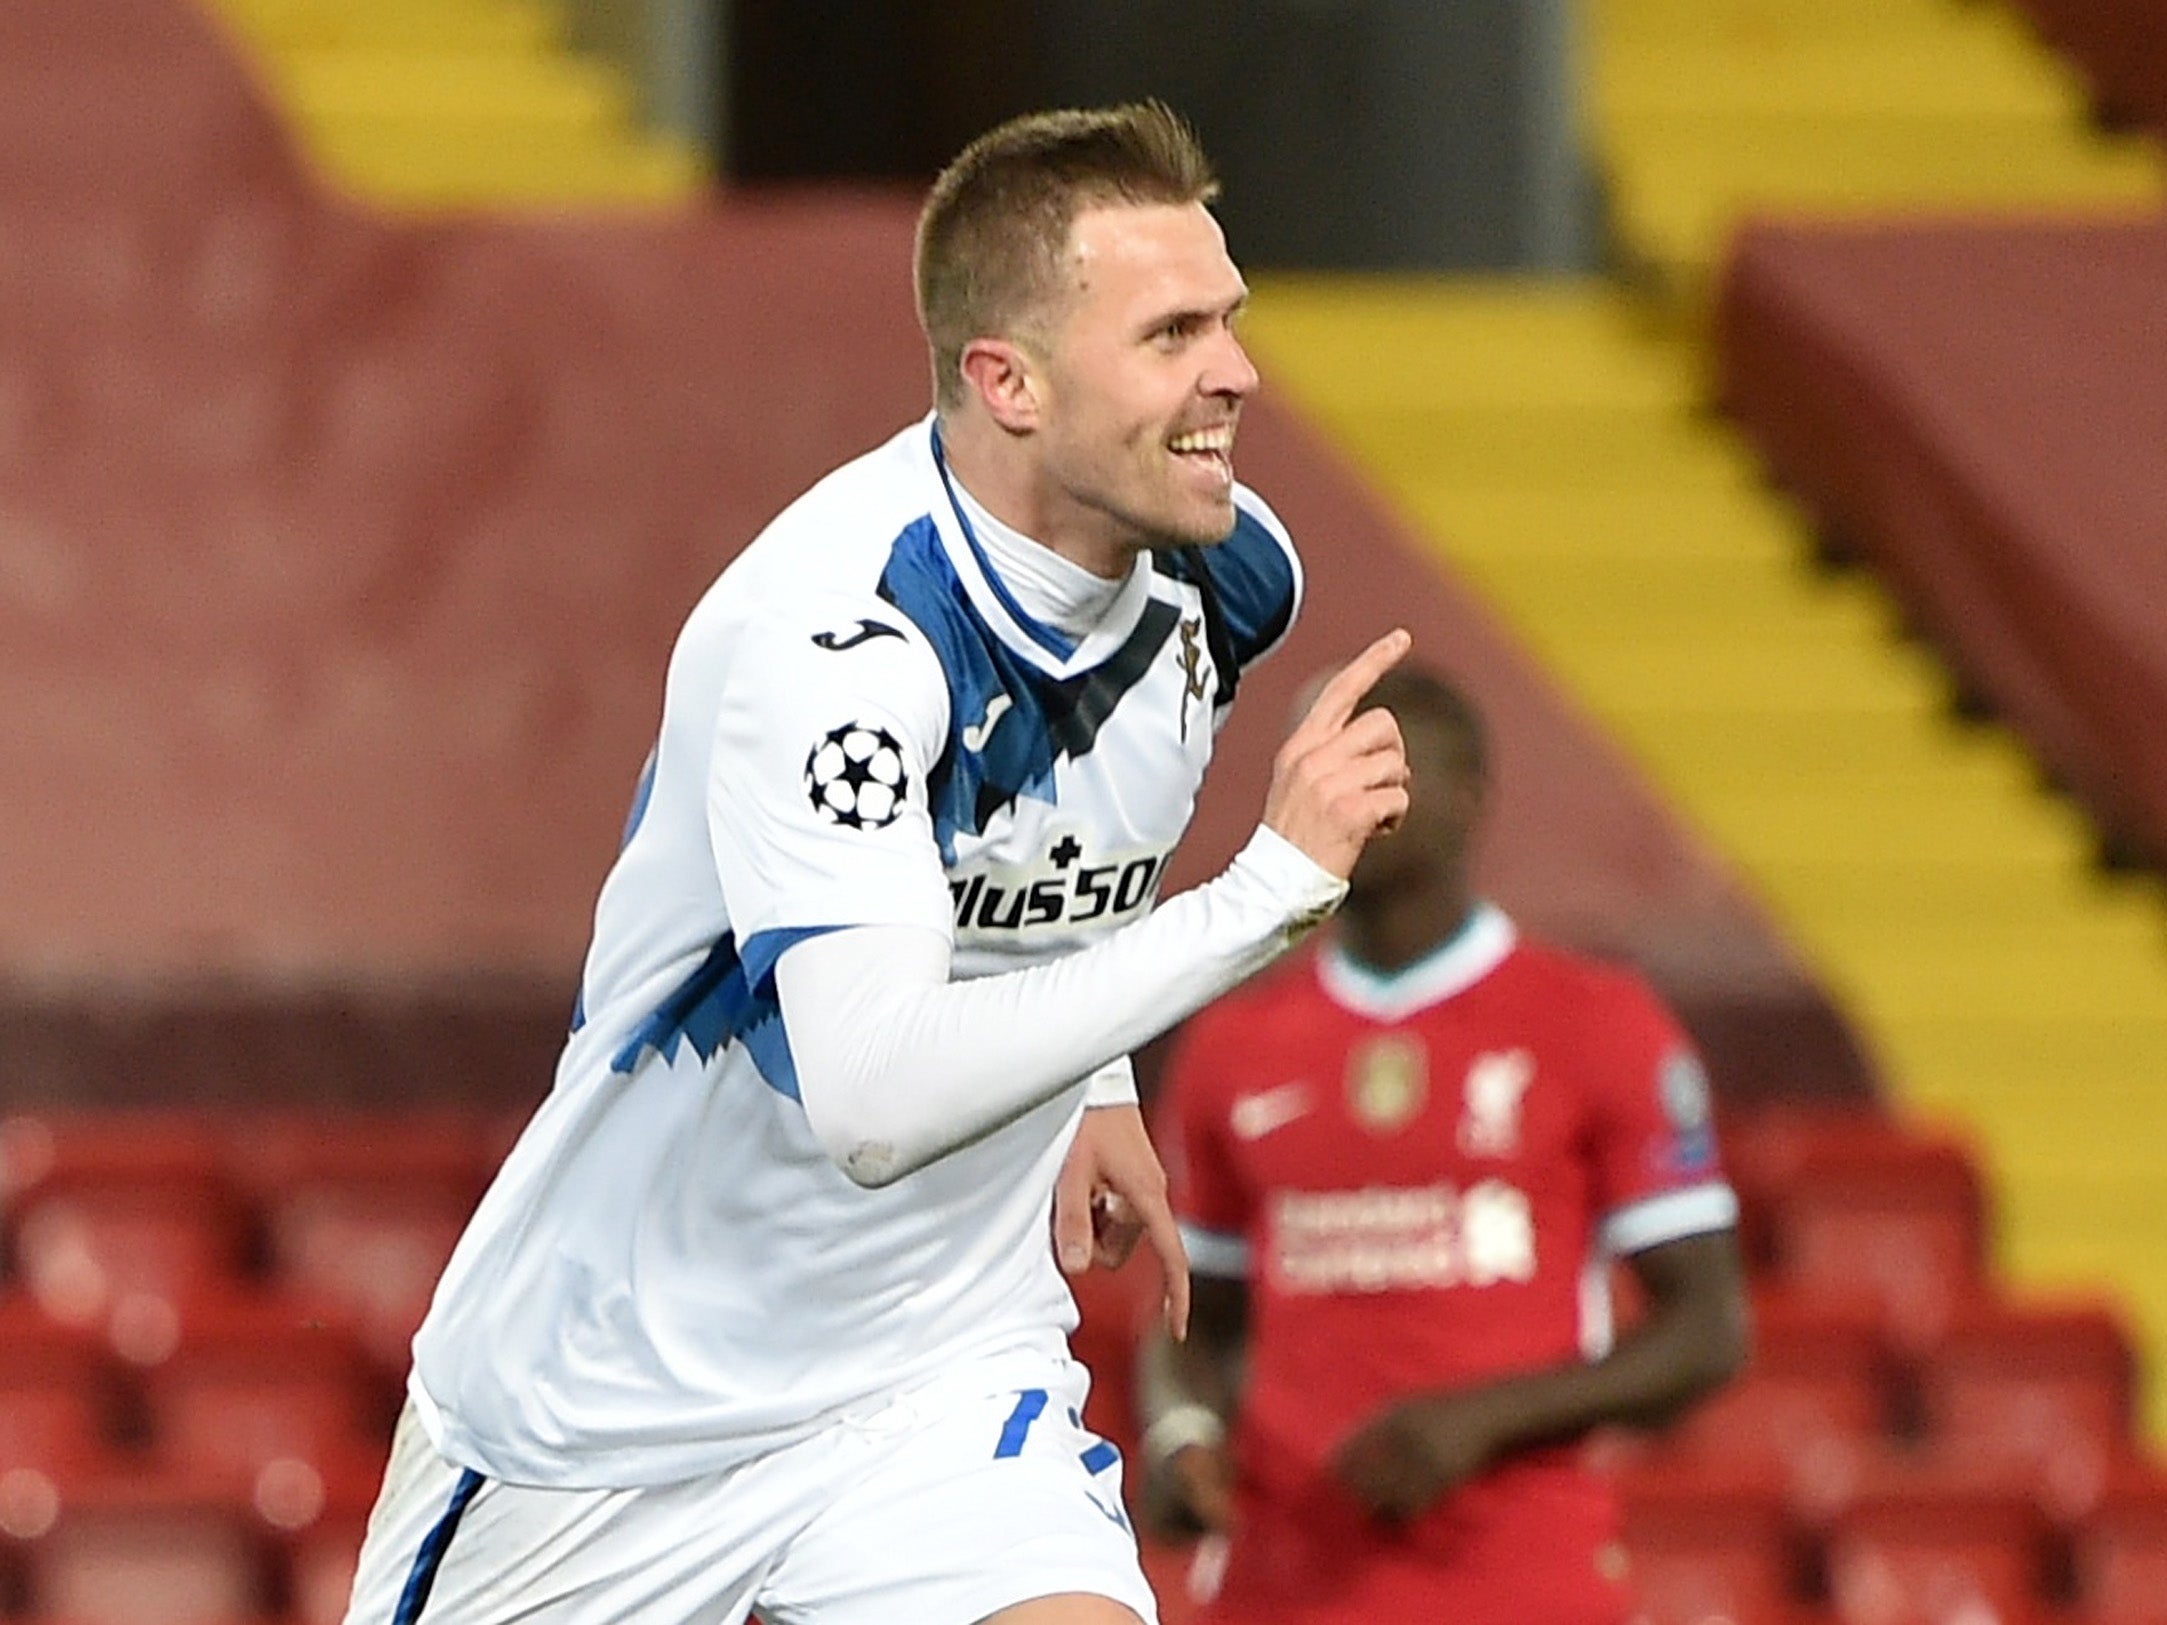 Ilicic celebrates his goal at Anfield